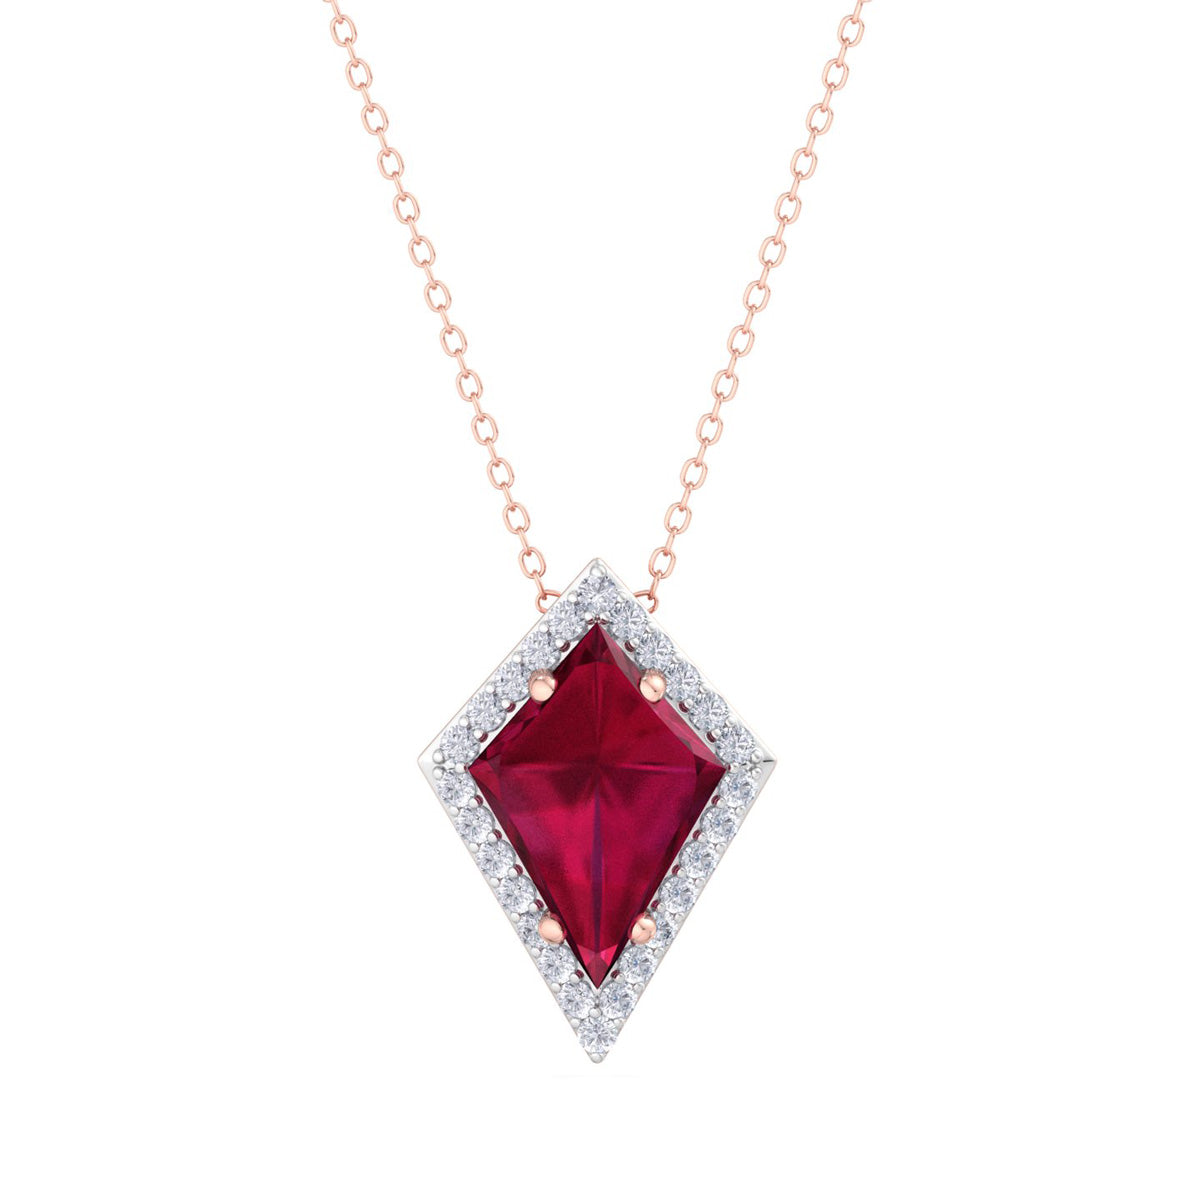 Sselects 1 3/4 Carat Kite Shape Ruby And Diamond Necklace In 14k In Multi